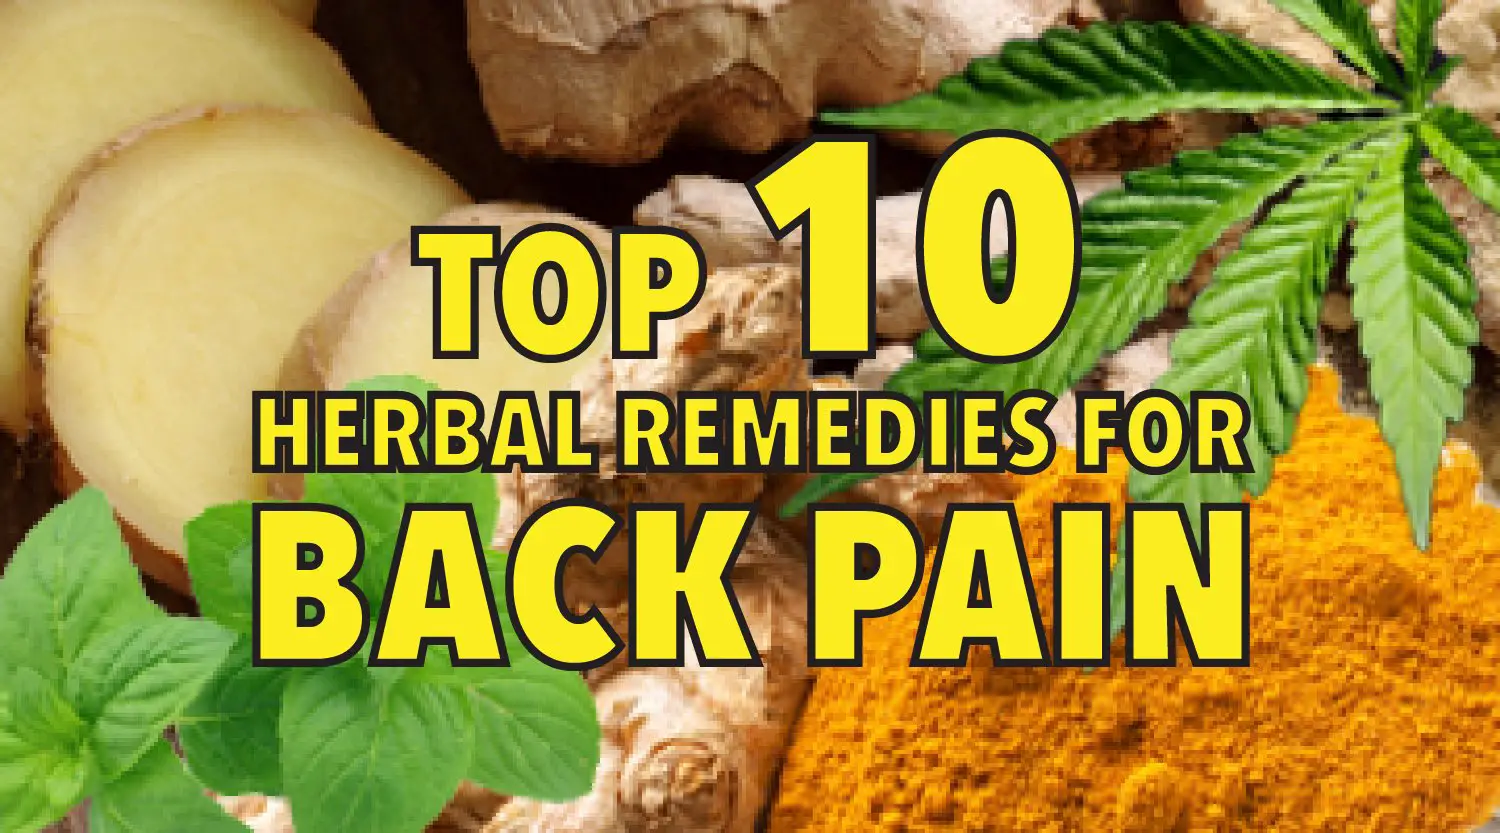 Top 10 natural herbal remedies for back pain